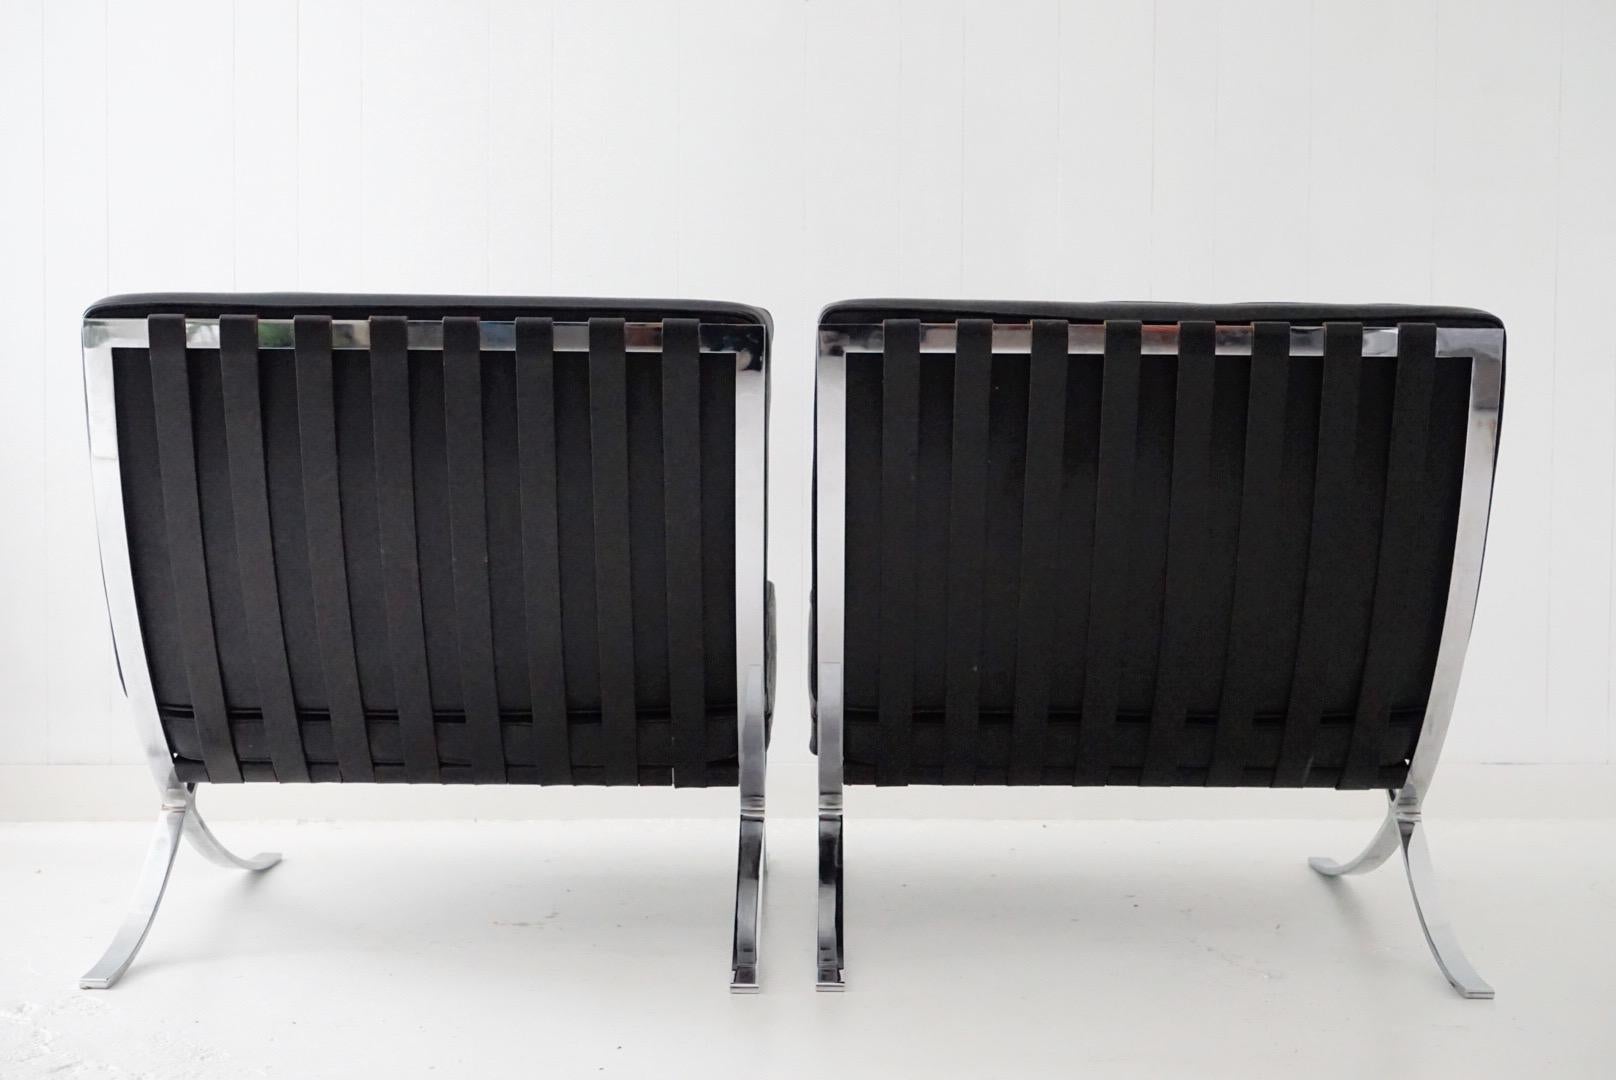 Late 20th Century Pair of Barcelona Lounge Chairs by Mies van der Rohe for Knoll Studios, Signed